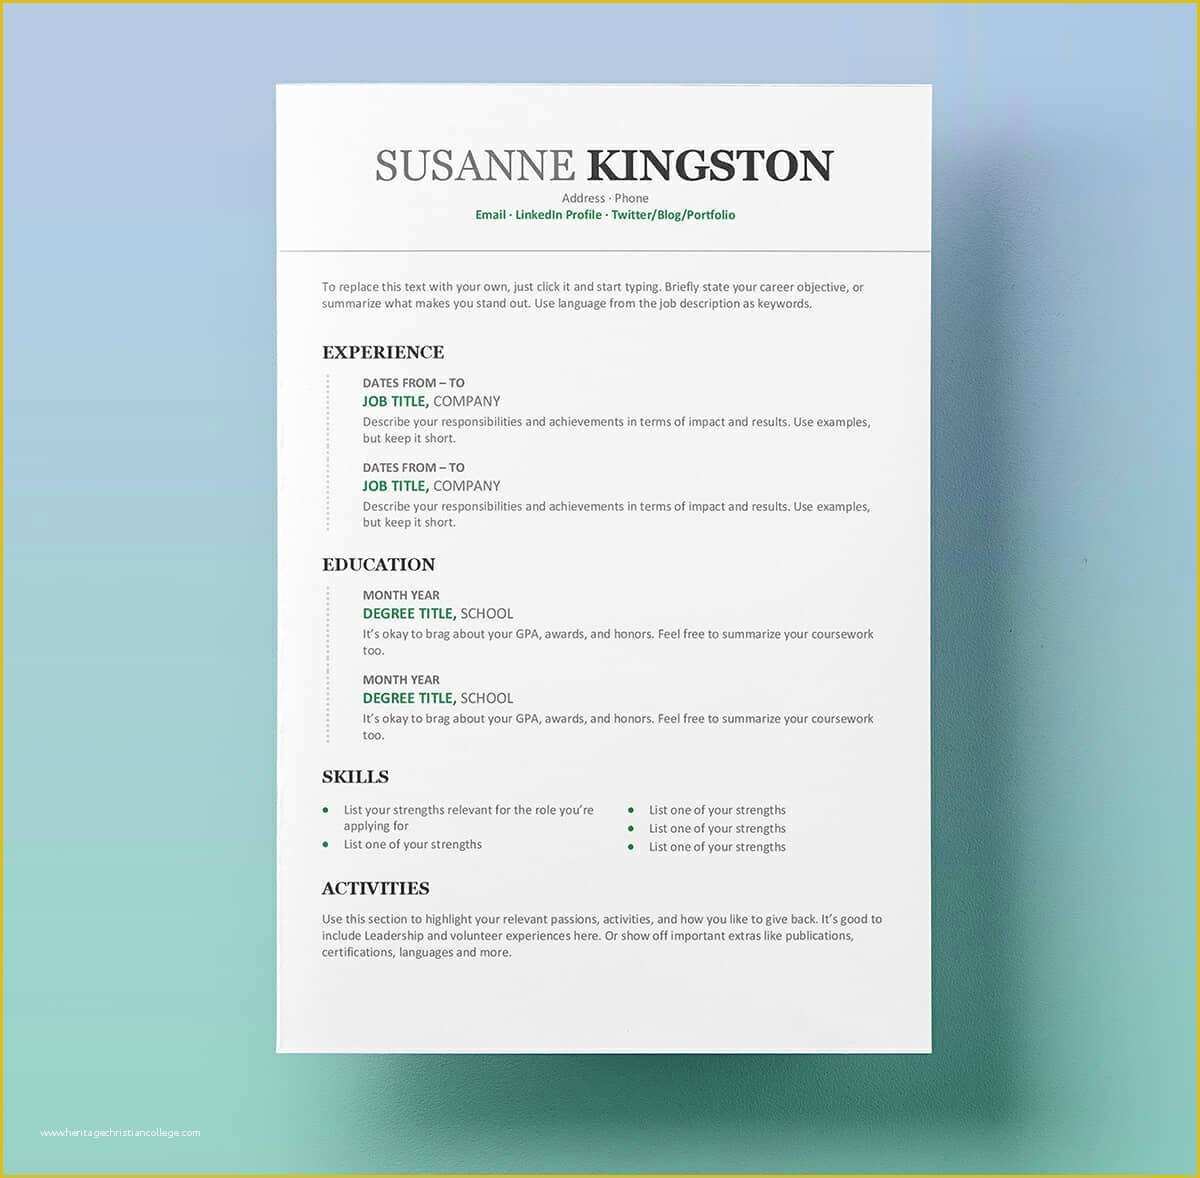 Free Online Resume Templates Word Of Resume Templates for Word Free 15 Examples for Download